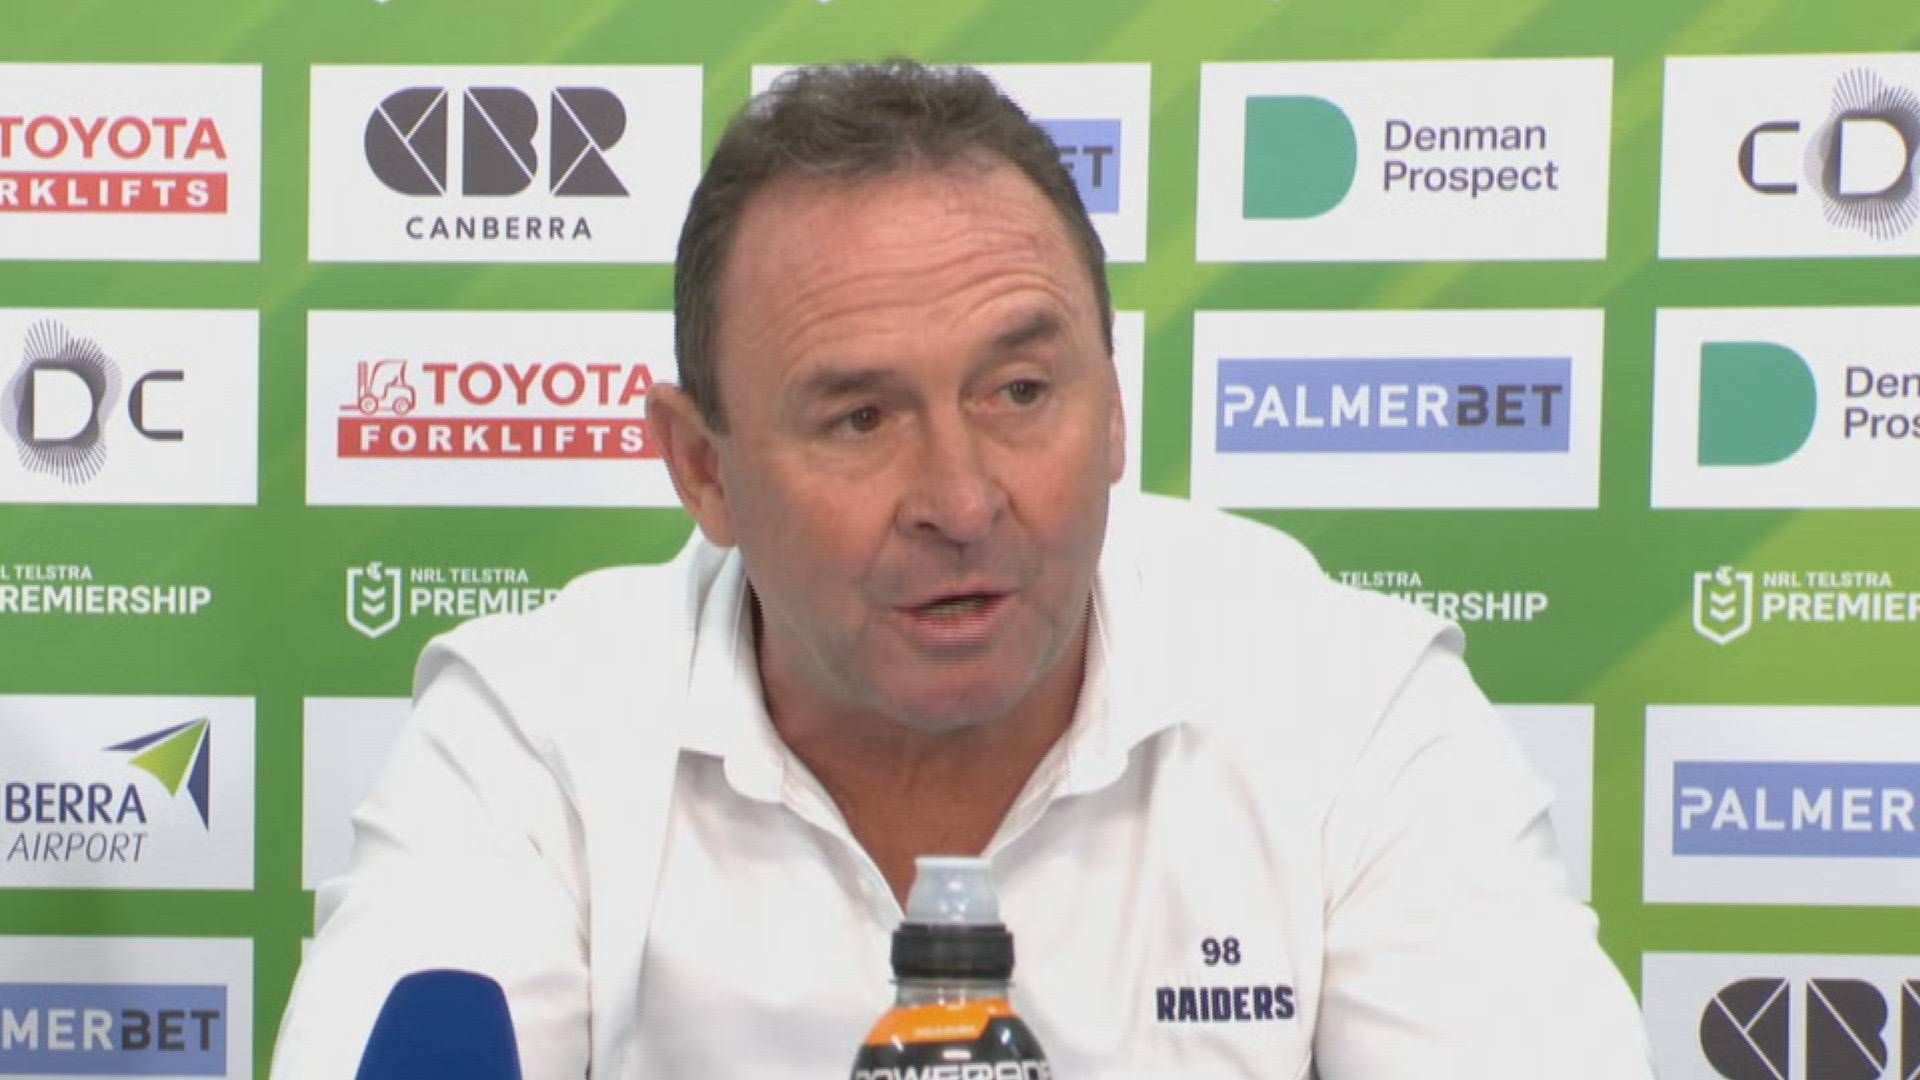 'On another planet': NRL legend Billy Slater reacts to 'war of words' between Ricky Stuart and Des Hasler